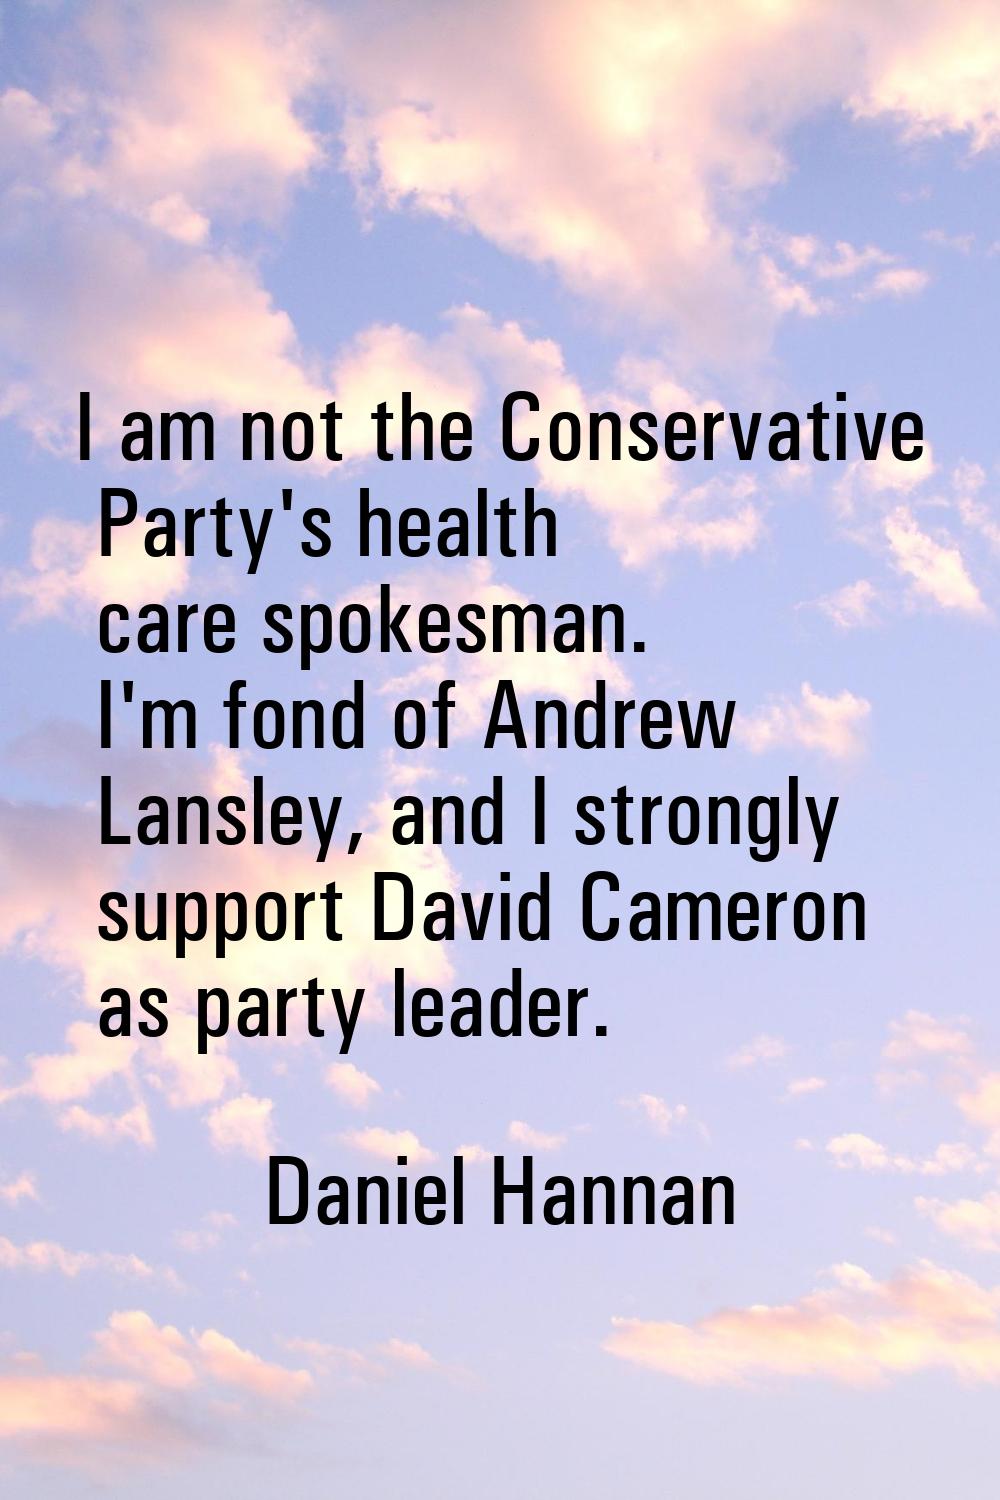 I am not the Conservative Party's health care spokesman. I'm fond of Andrew Lansley, and I strongly